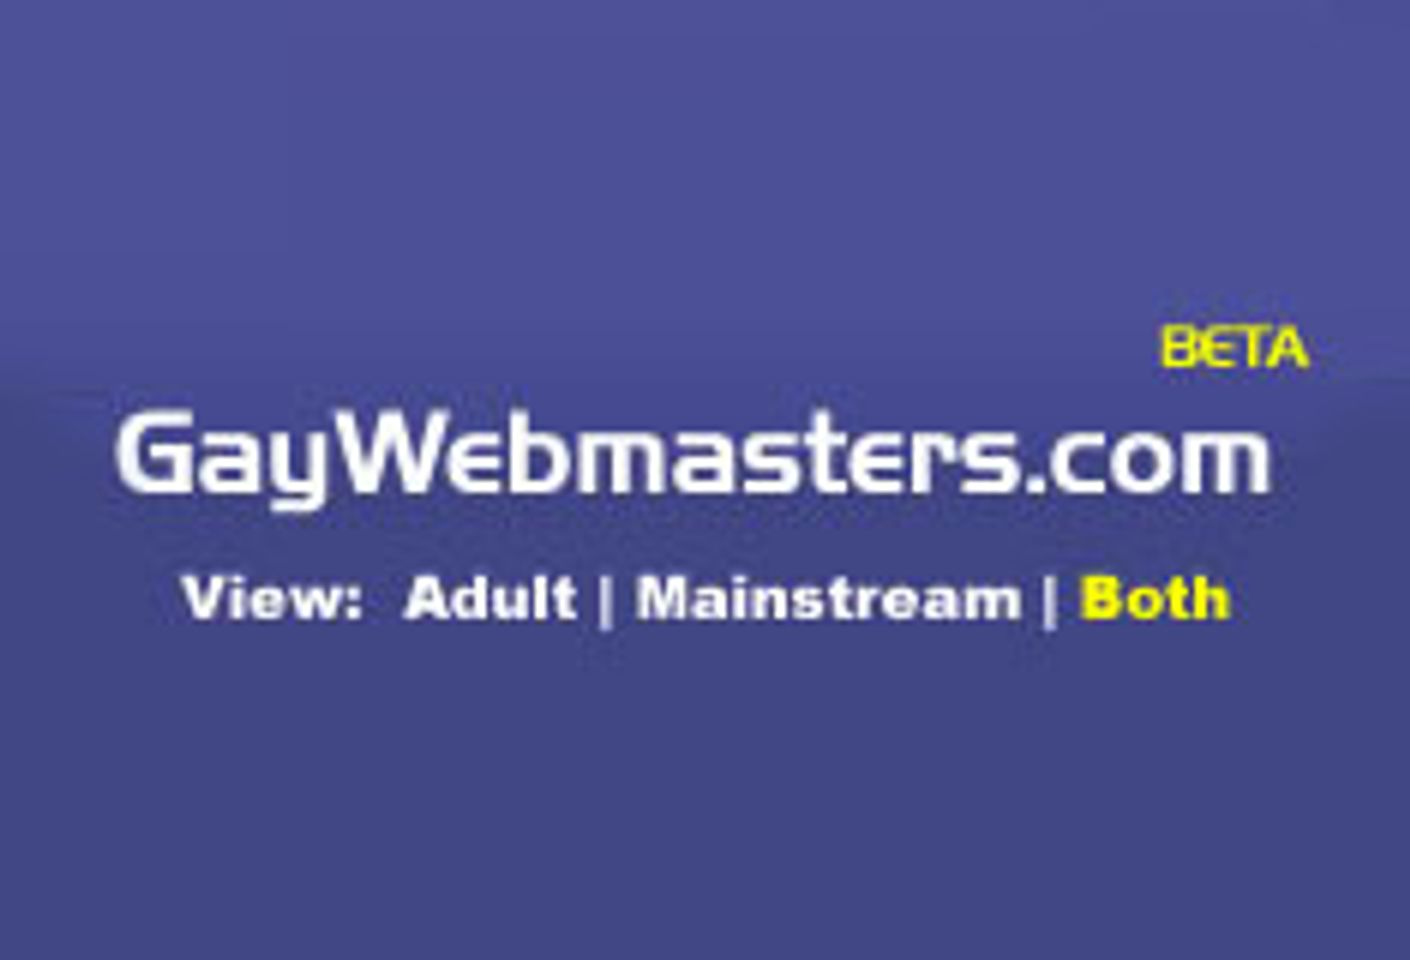 GayWebmasters.com Launches Beta Version, $5,000 Giveaway